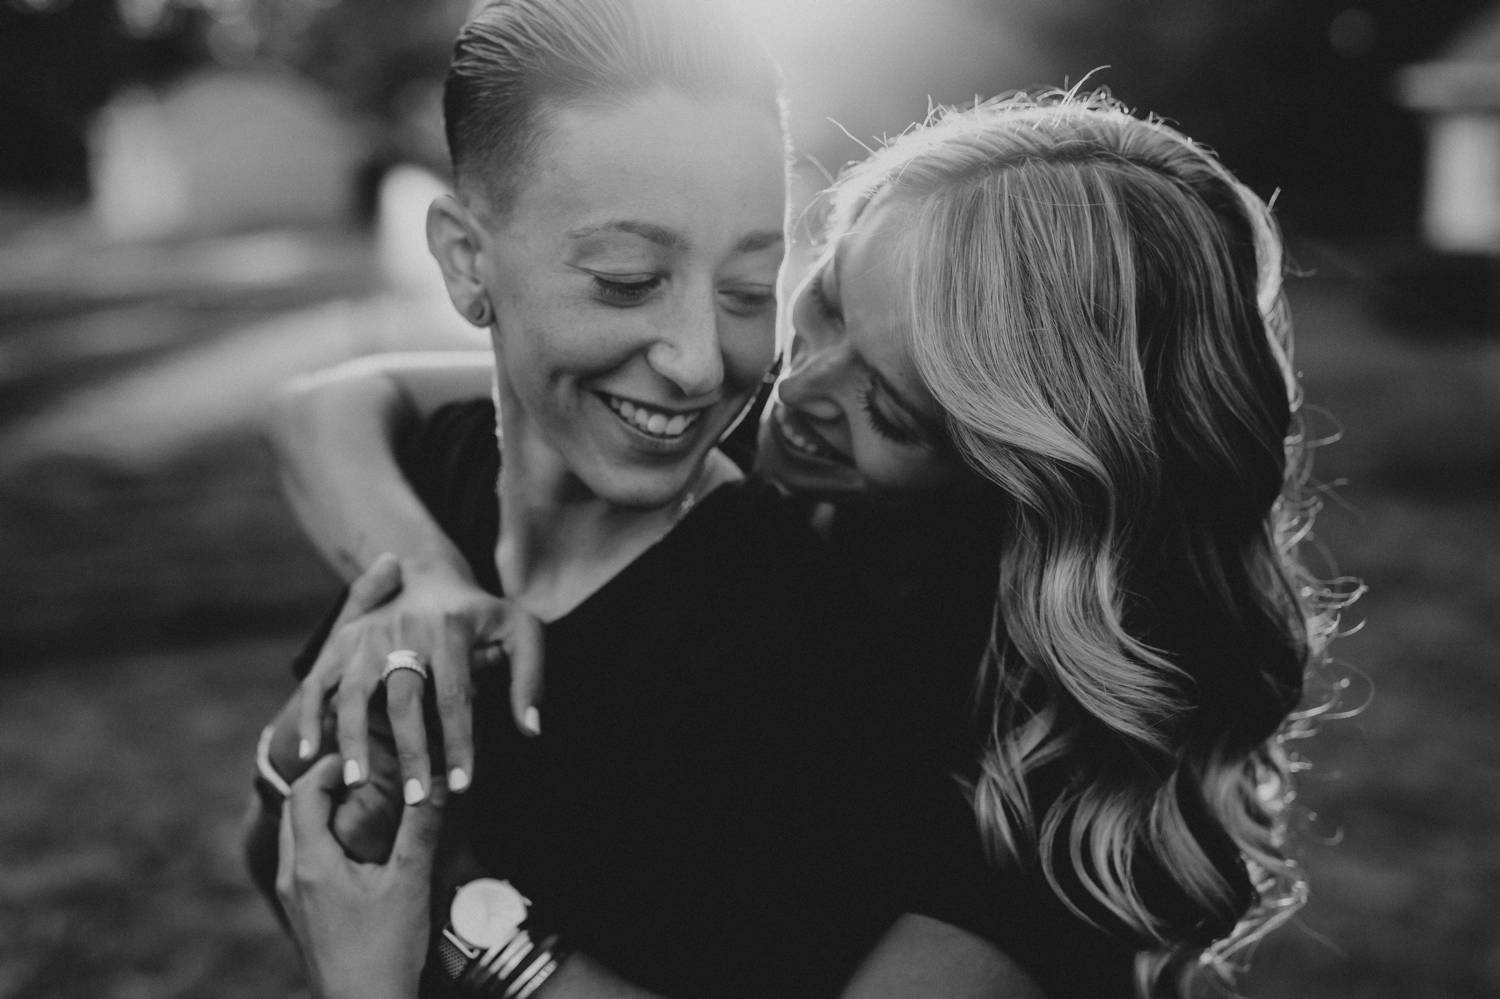 Why You Should Hire a Connecticut Proposal Photographer